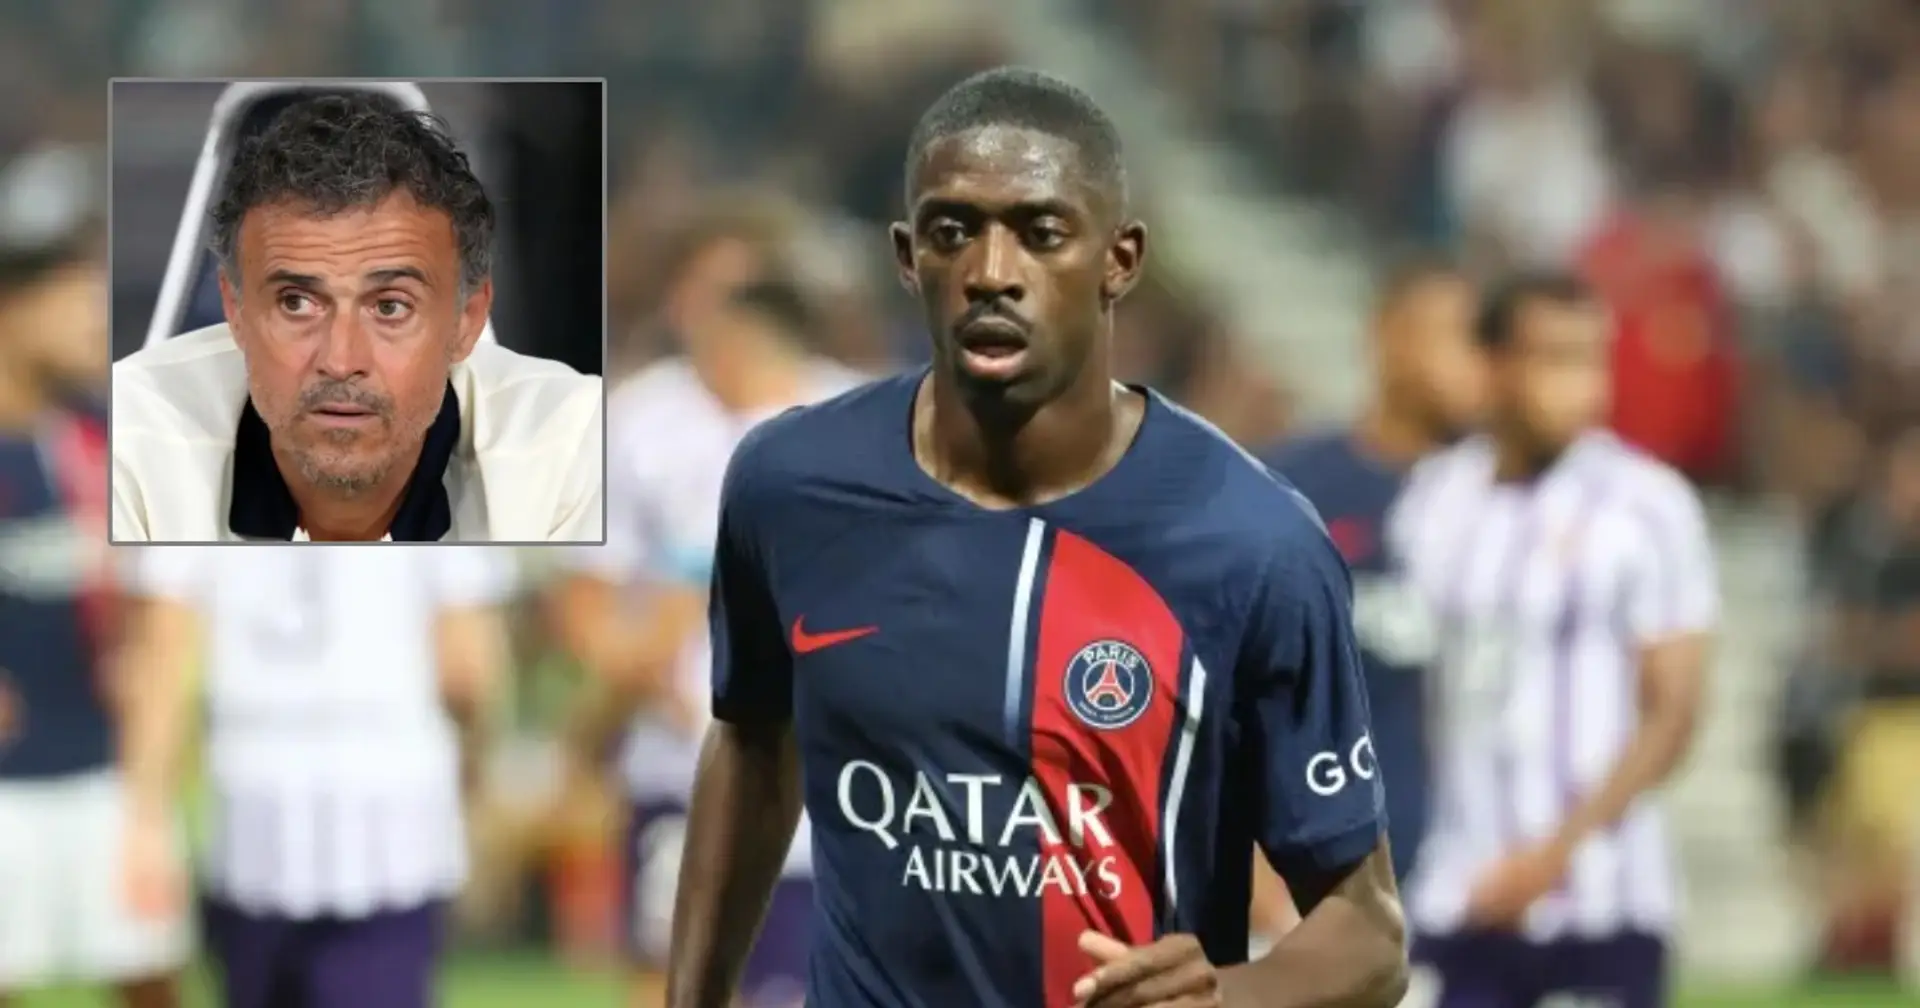 PSG coach Enrique to Dembele: 'I won't accept slacking off on the pitch'